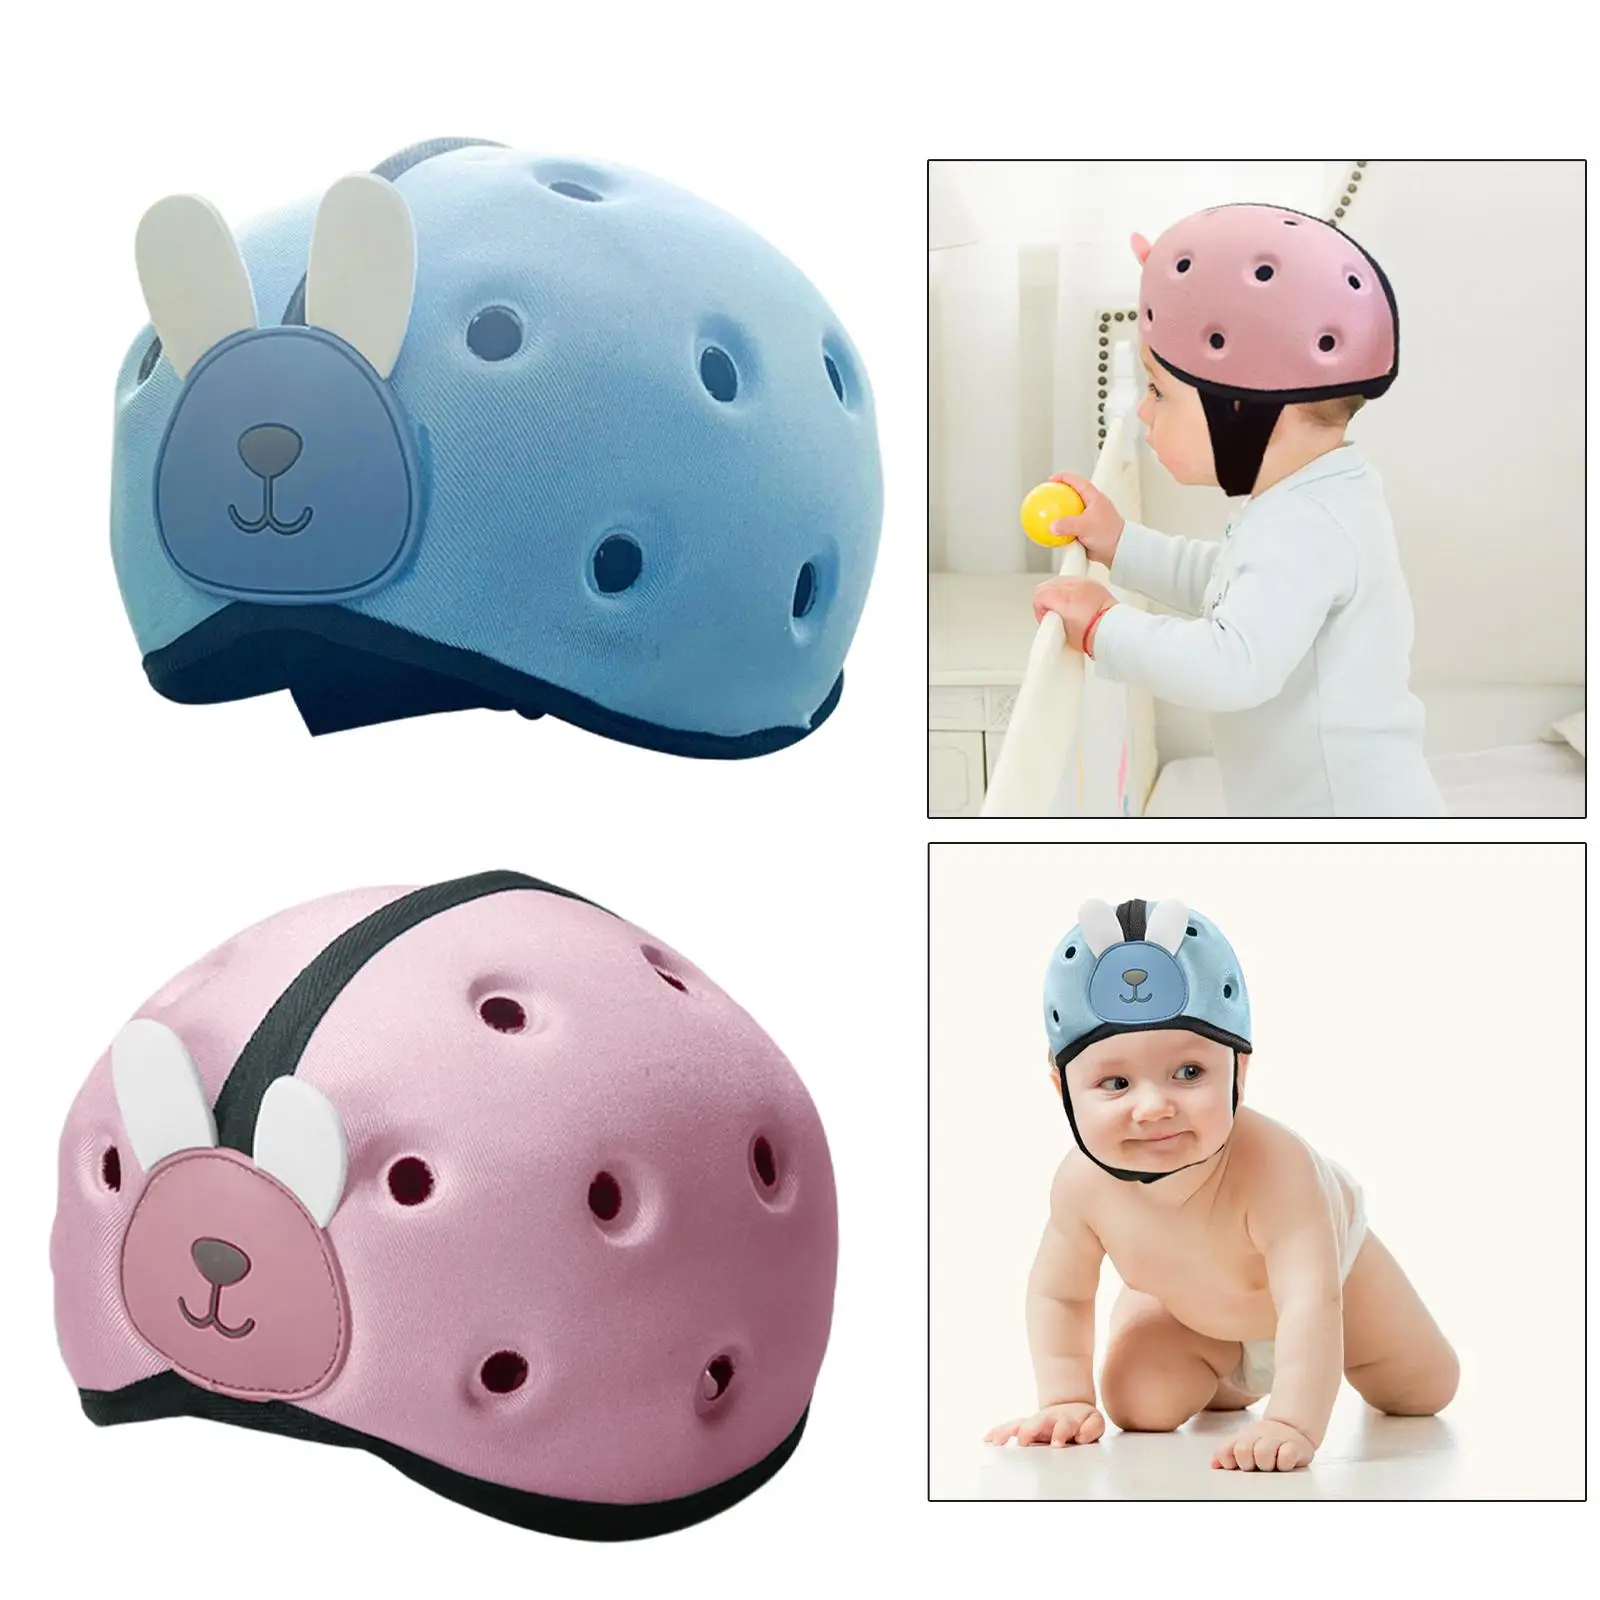 Baby Soft Protective , Breathable, Anti-, Harness, Beanie, Baby Head Guard, Head Guard for Kids, Toddlers, Running